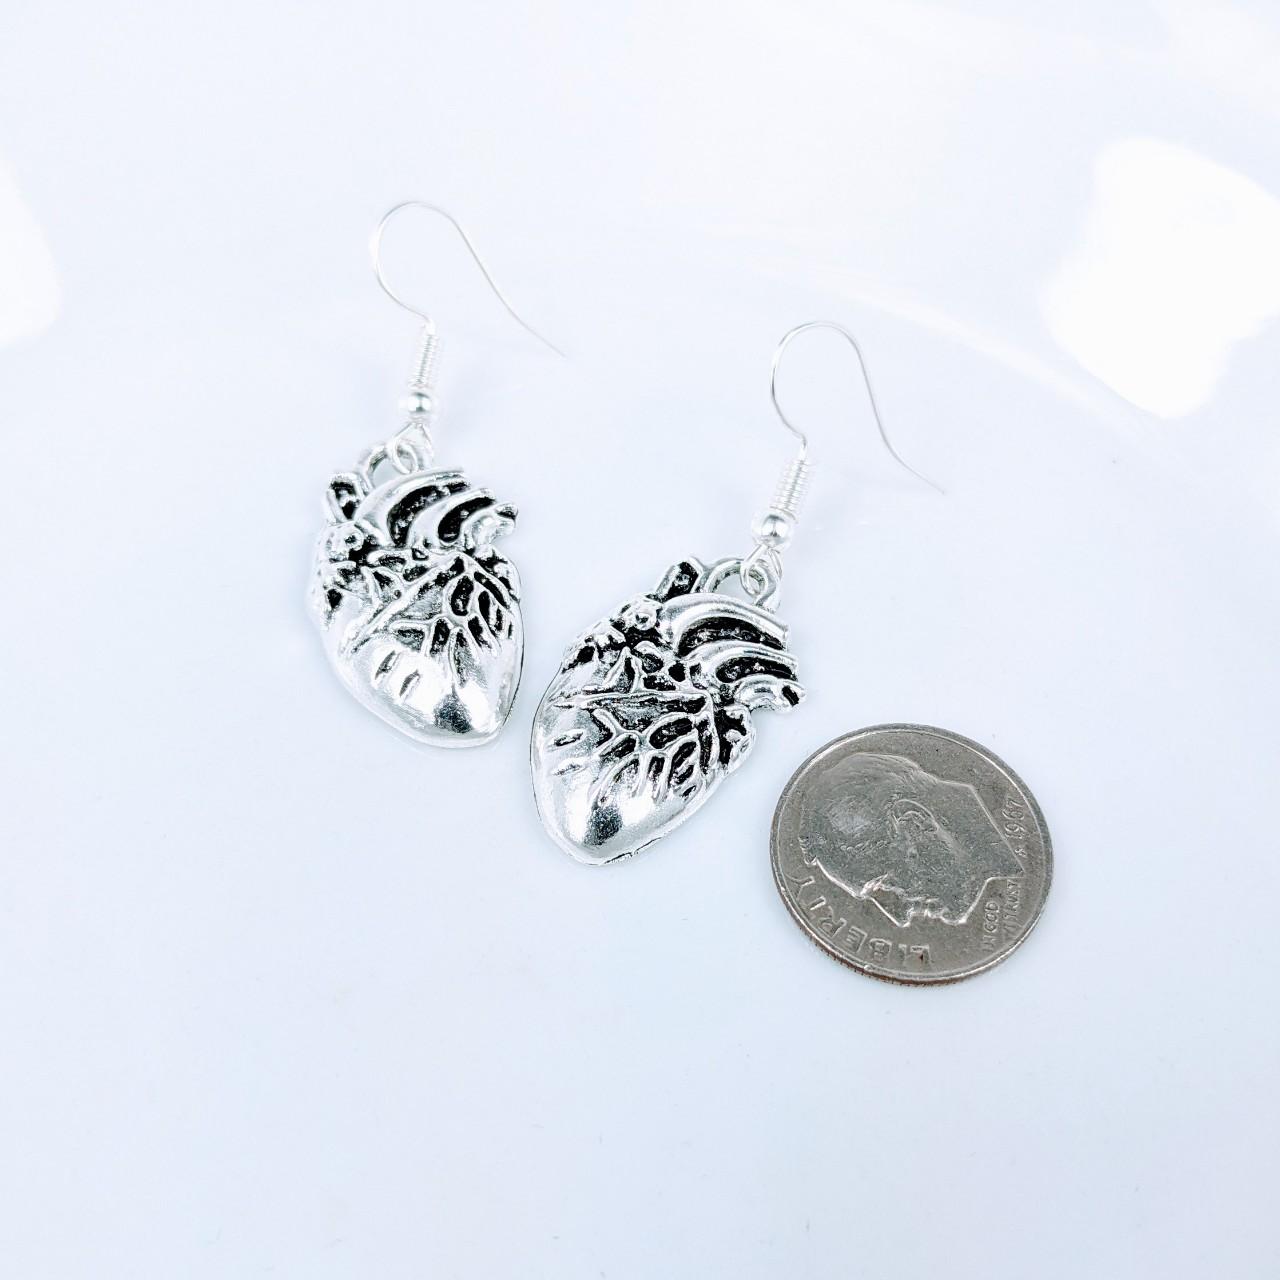 Product Image 3 - Anatomy Heart Earrings
Brand new. 

Made